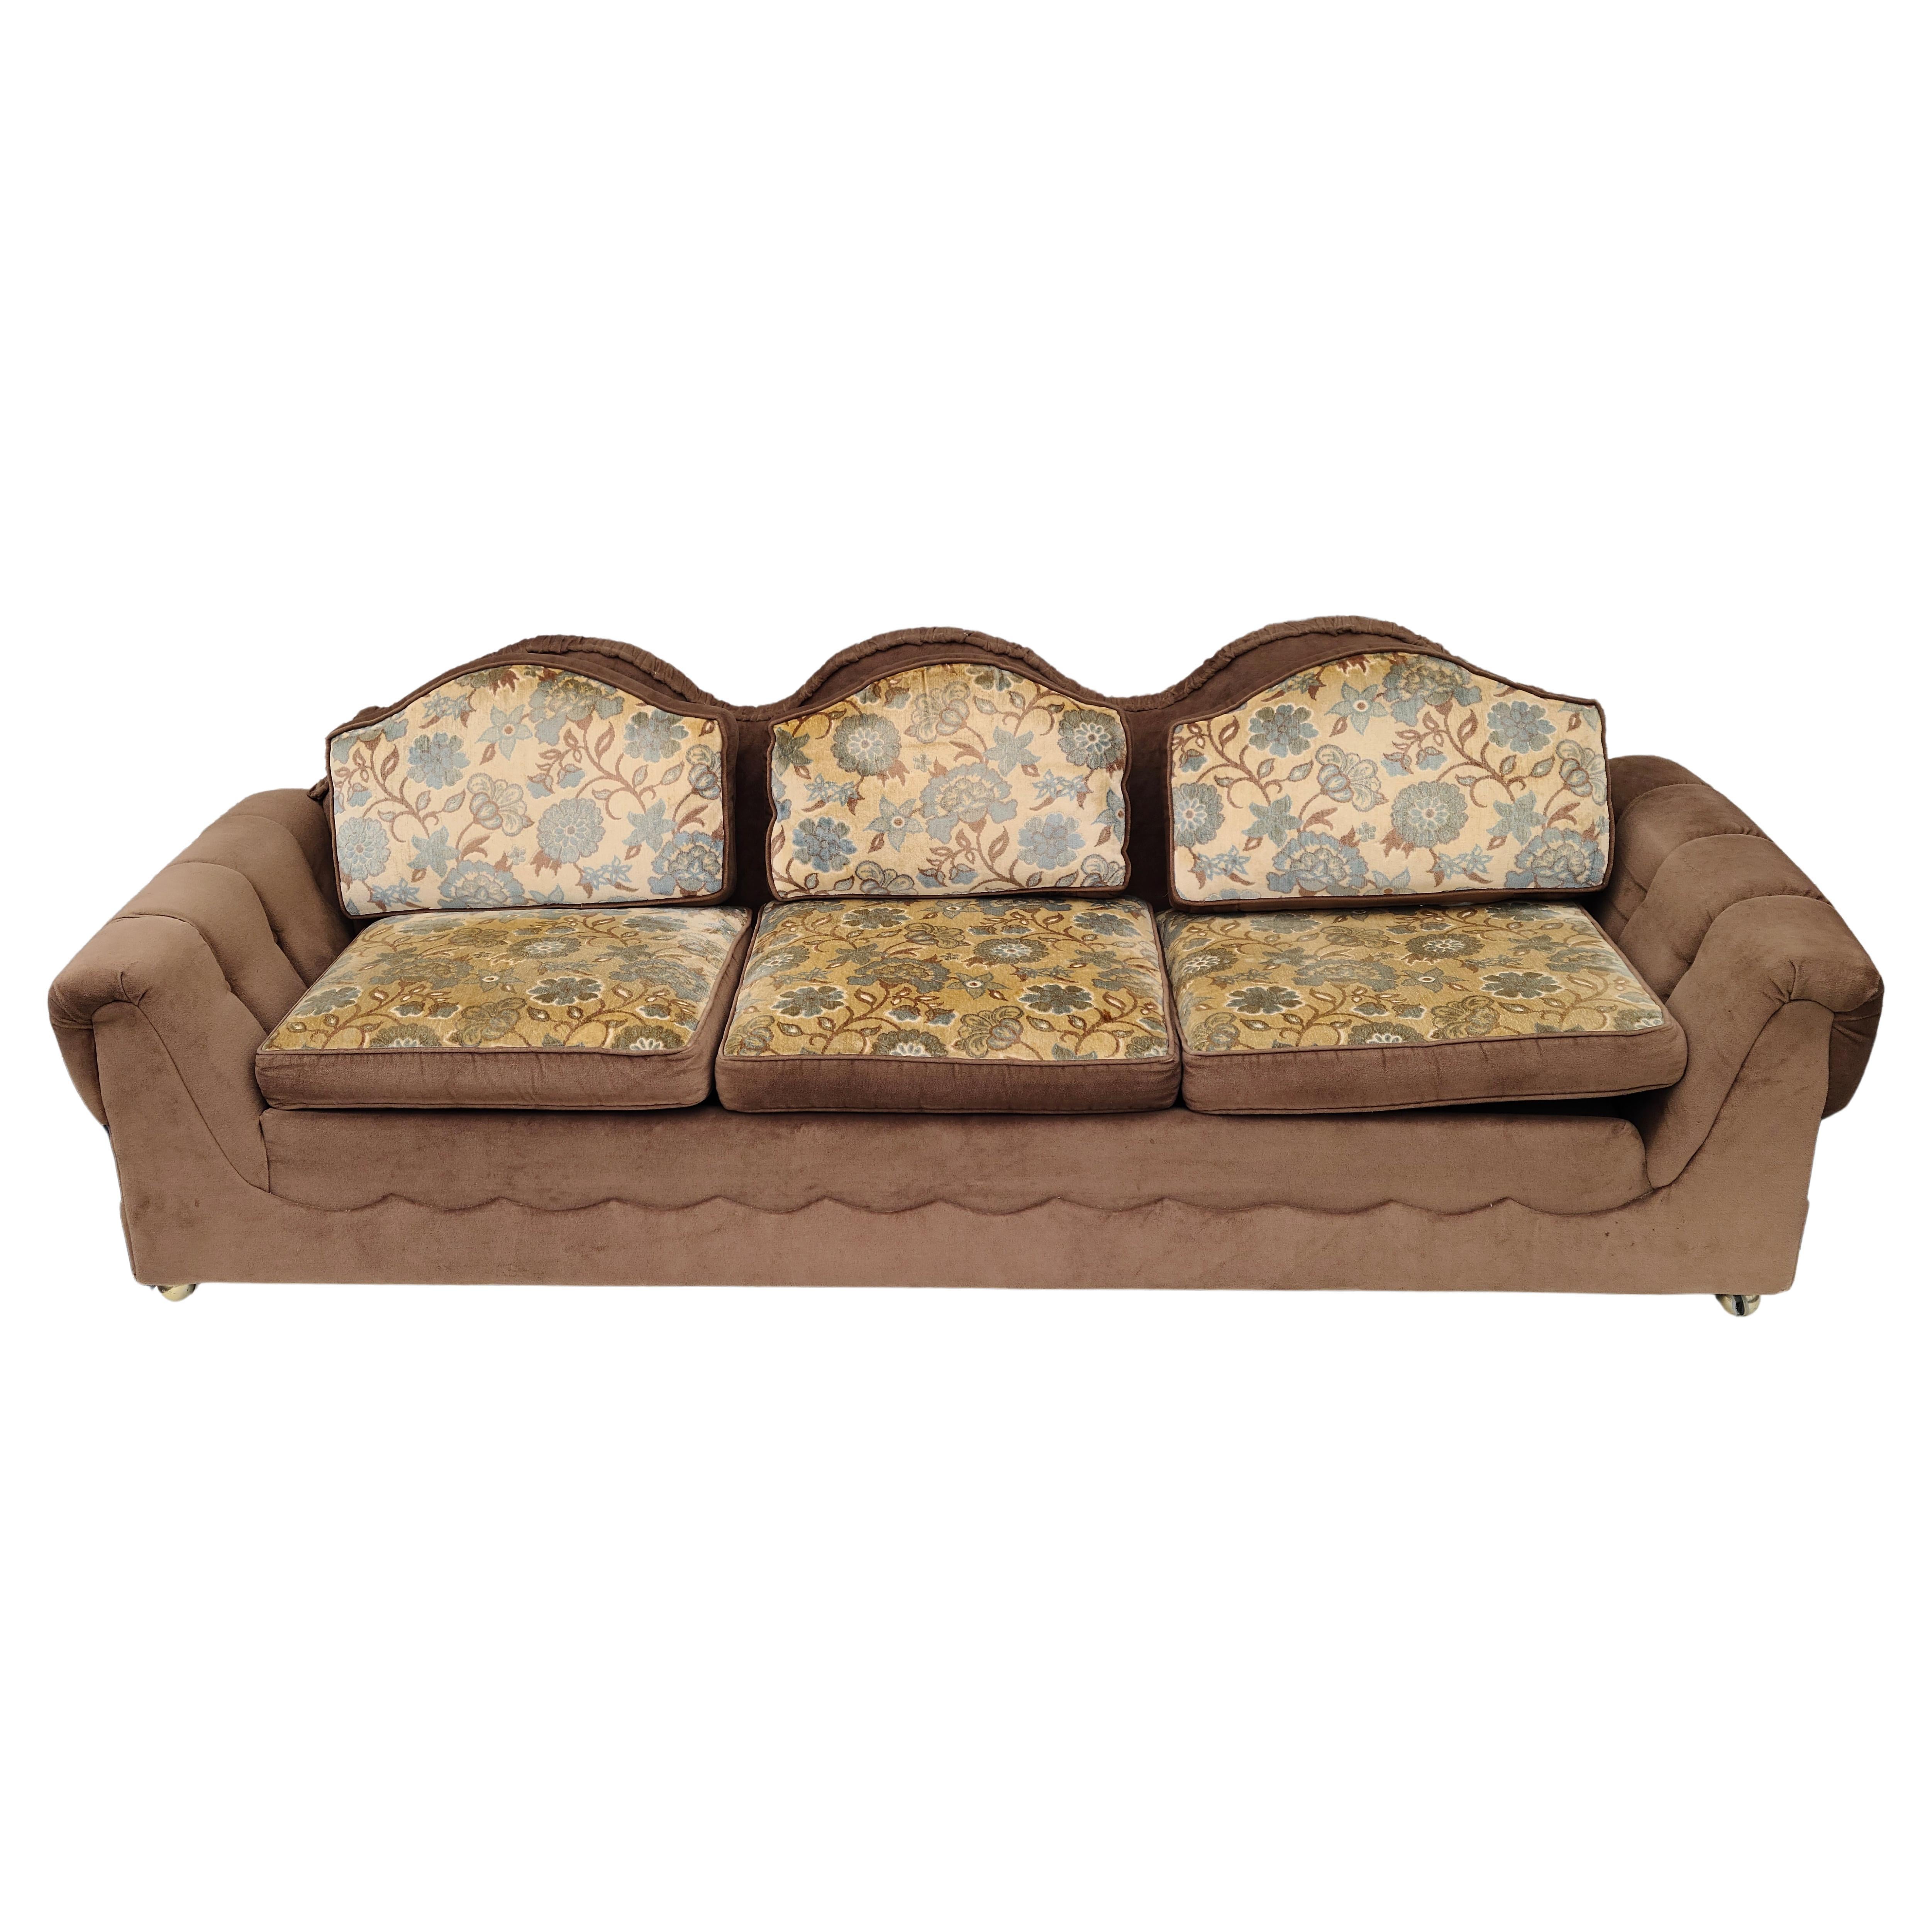 Please feel free to reach out for efficient shipping to your location.

Strictly Spanish group sofa designed by Craft Associates.

Probably for restoration.